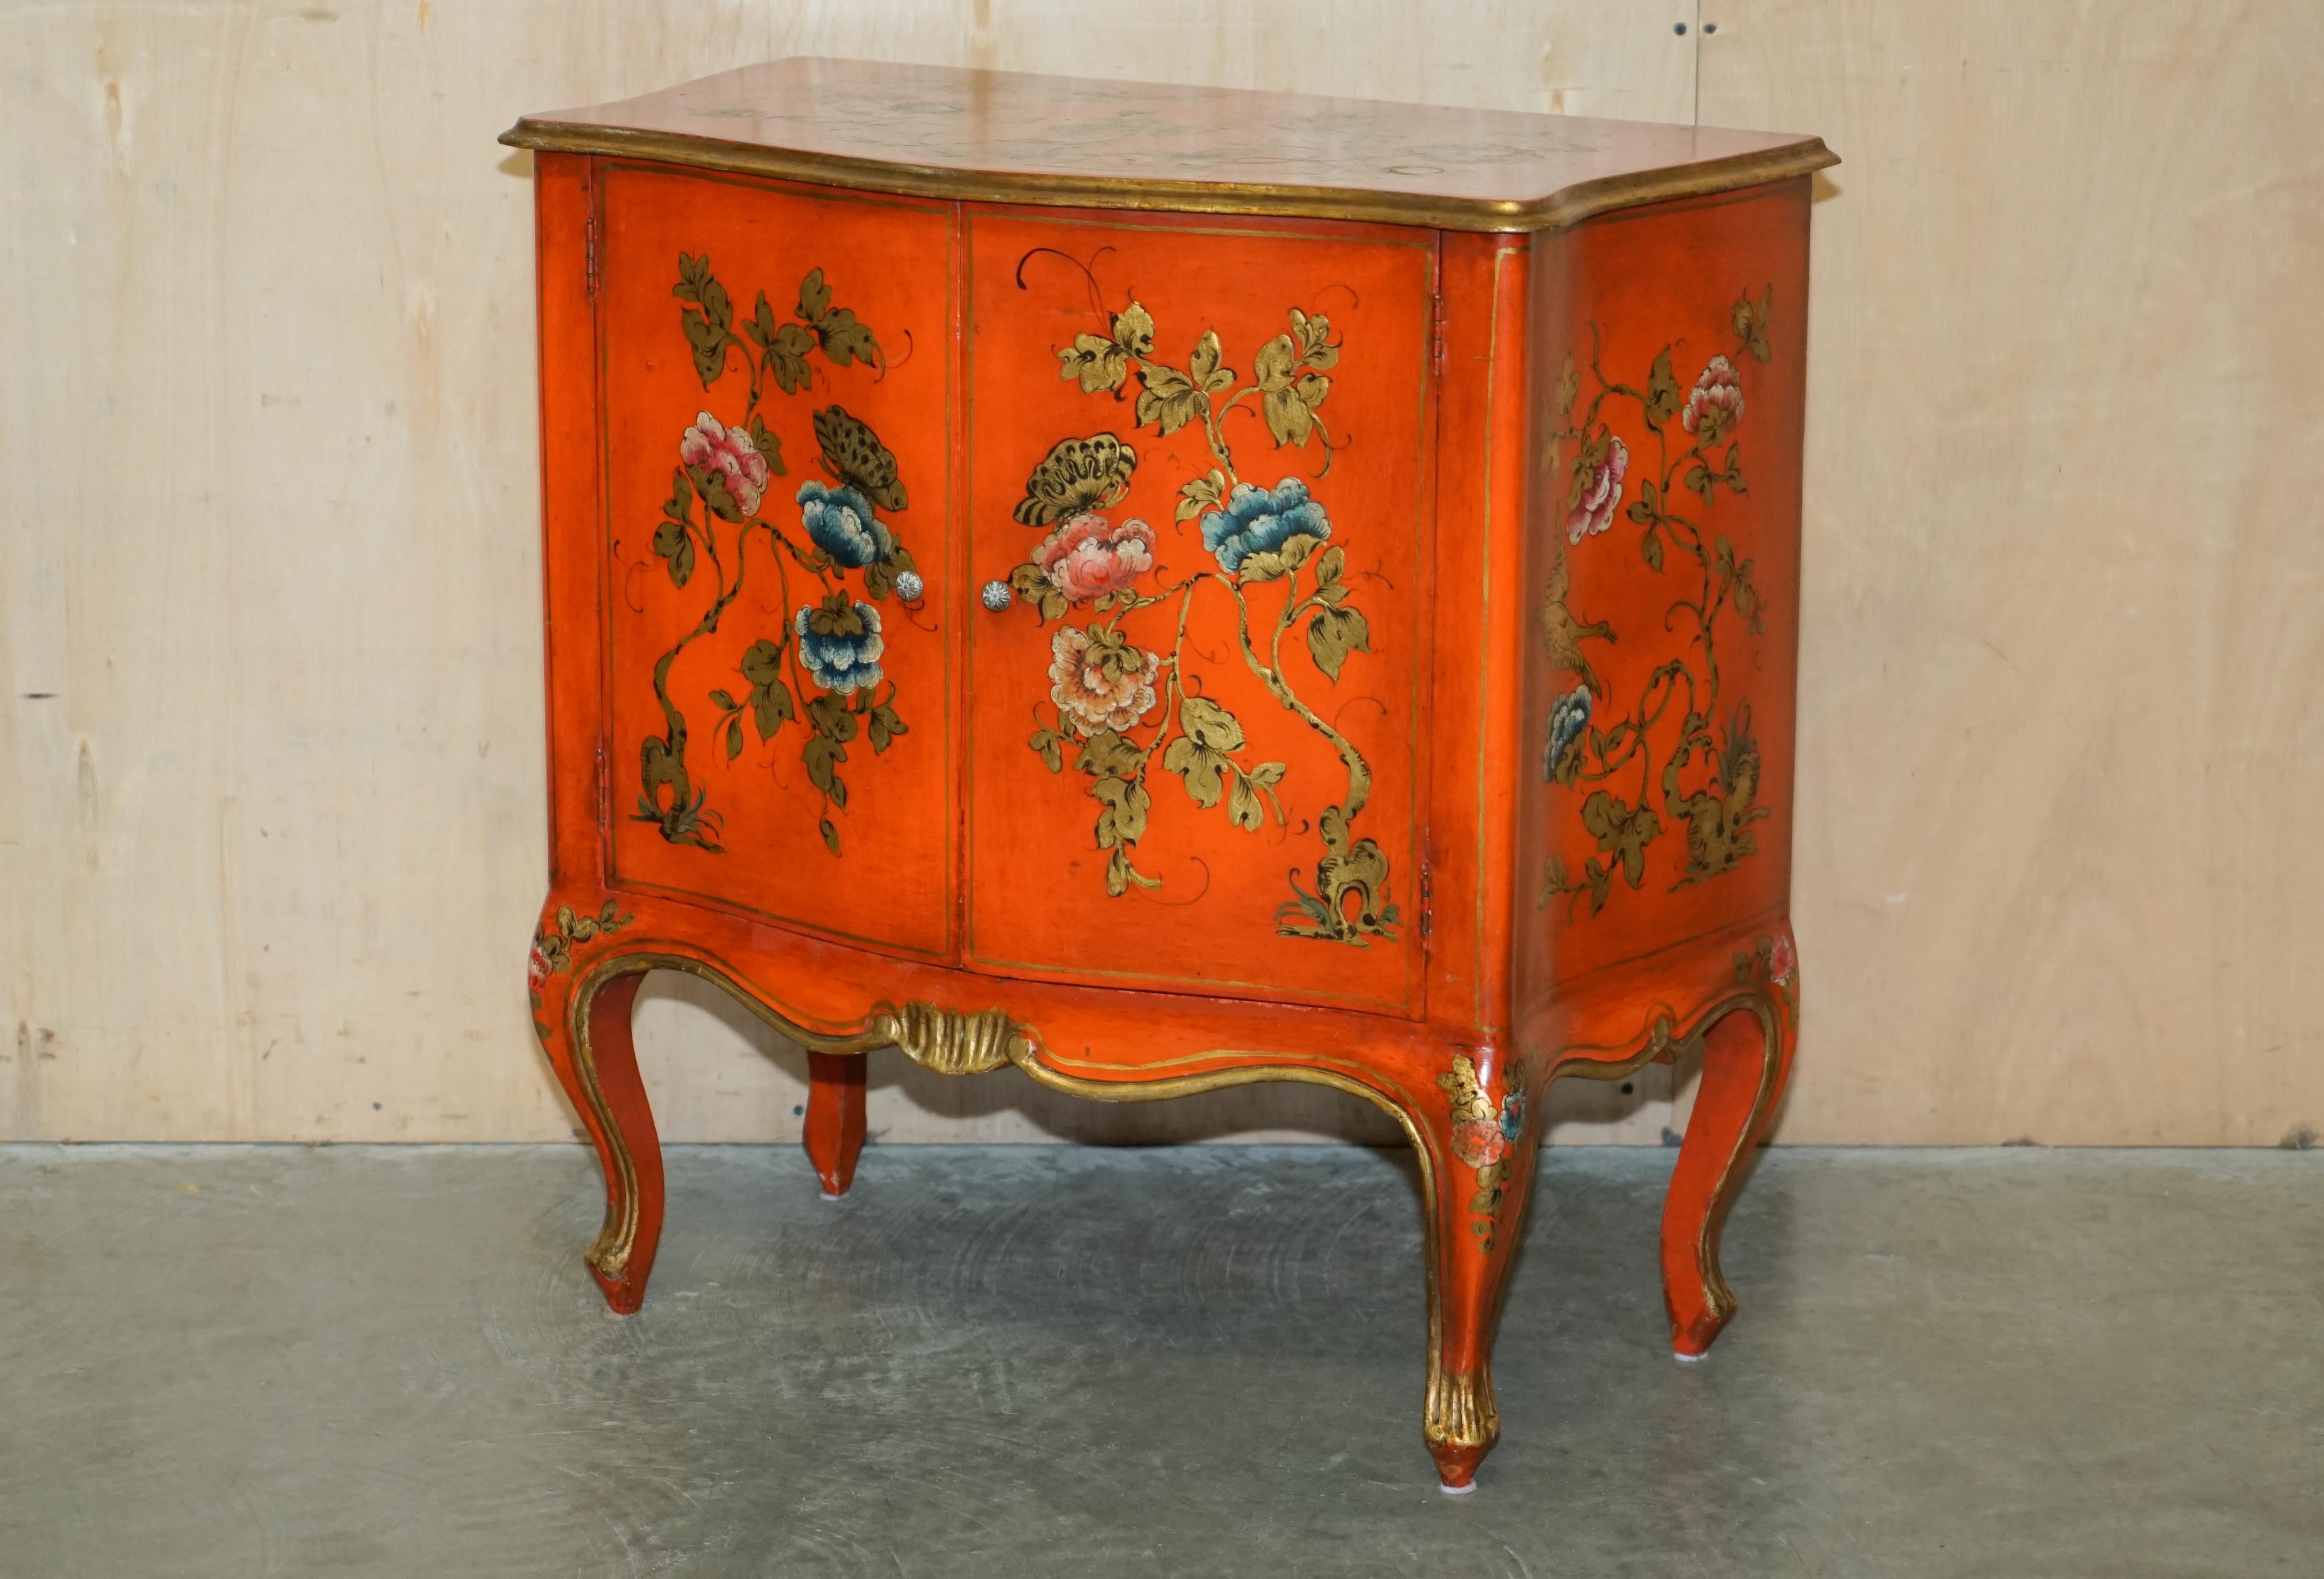 Royal House Antiques

Royal House Antiques is delighted to offer for sale this lovely vintage Chinese side cabinet with native scenes of Geisha girls hand carved, lacquered and decorated in the Chinoiserie style circa 1920's

Please note the